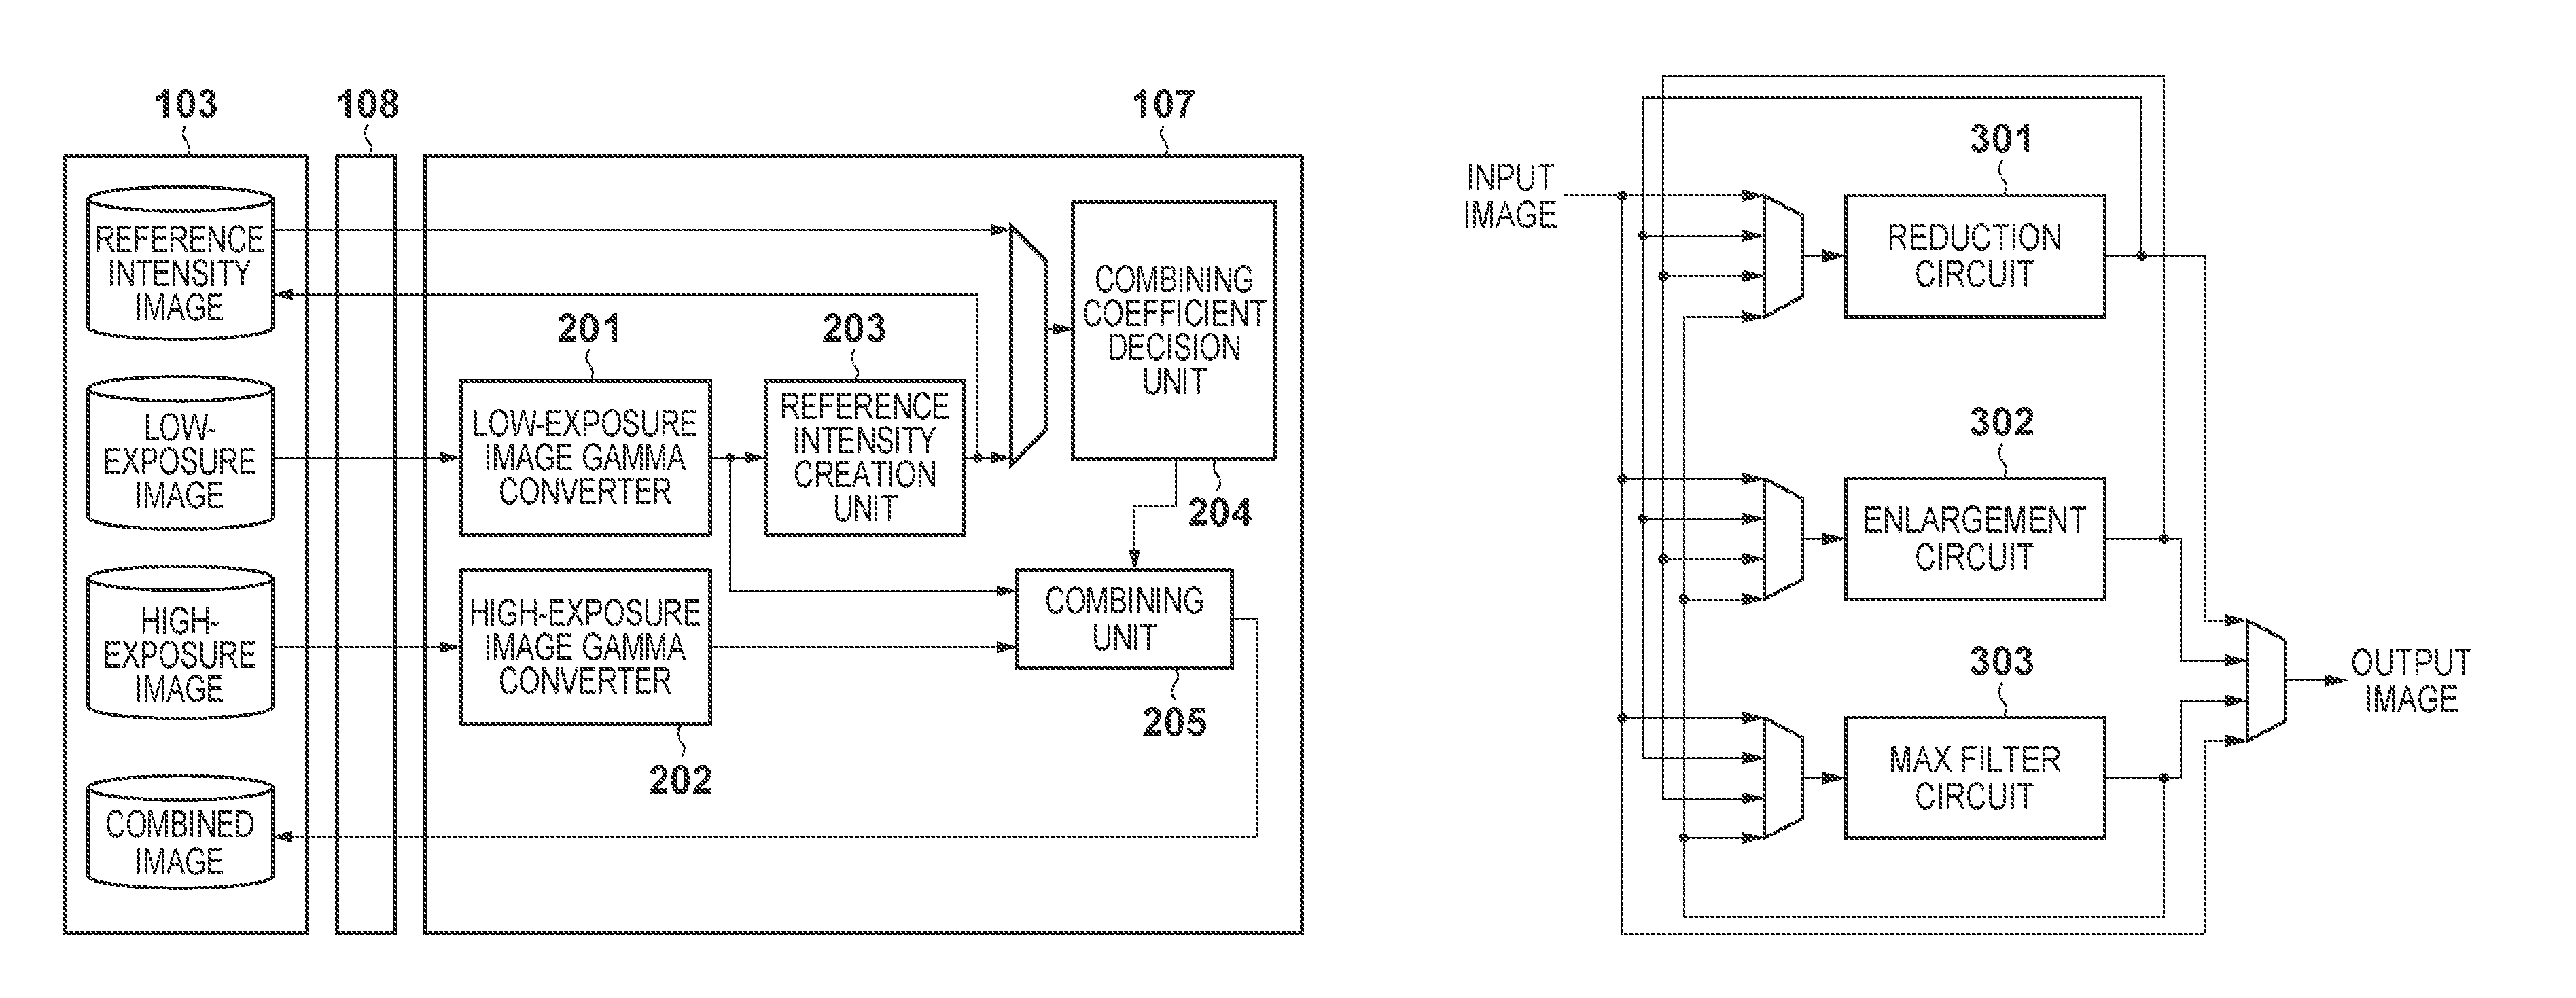 Image processing apparatus and method in which first and second images are combined in a weighted manner based on a third image